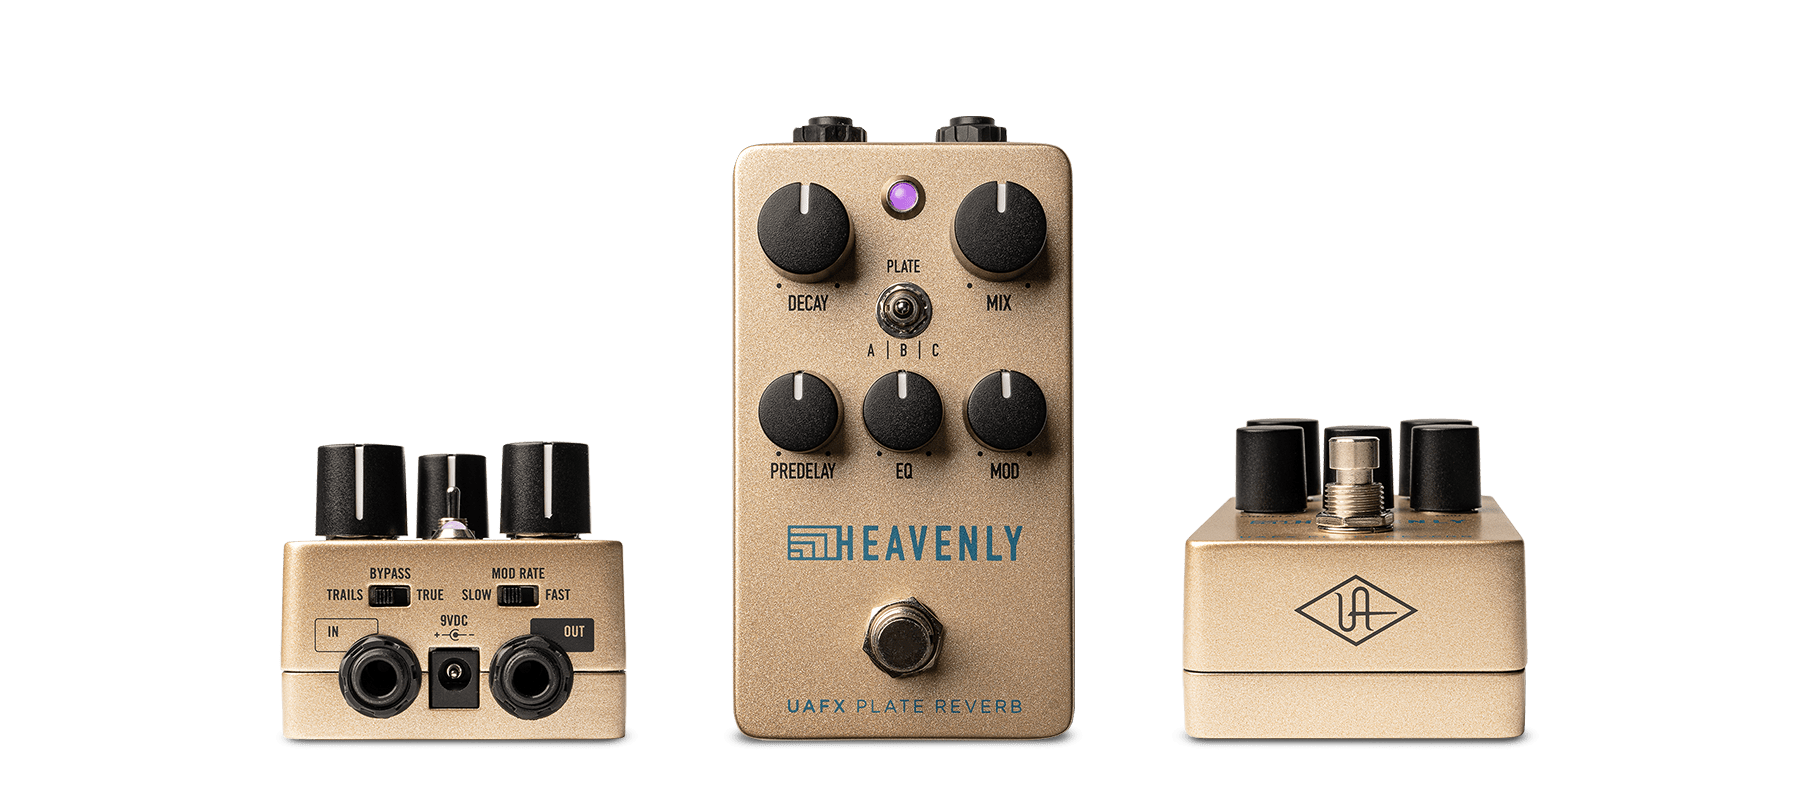 Universal Audio | UAFX Heavenly Plate Reverb Guitar Effects Pedal